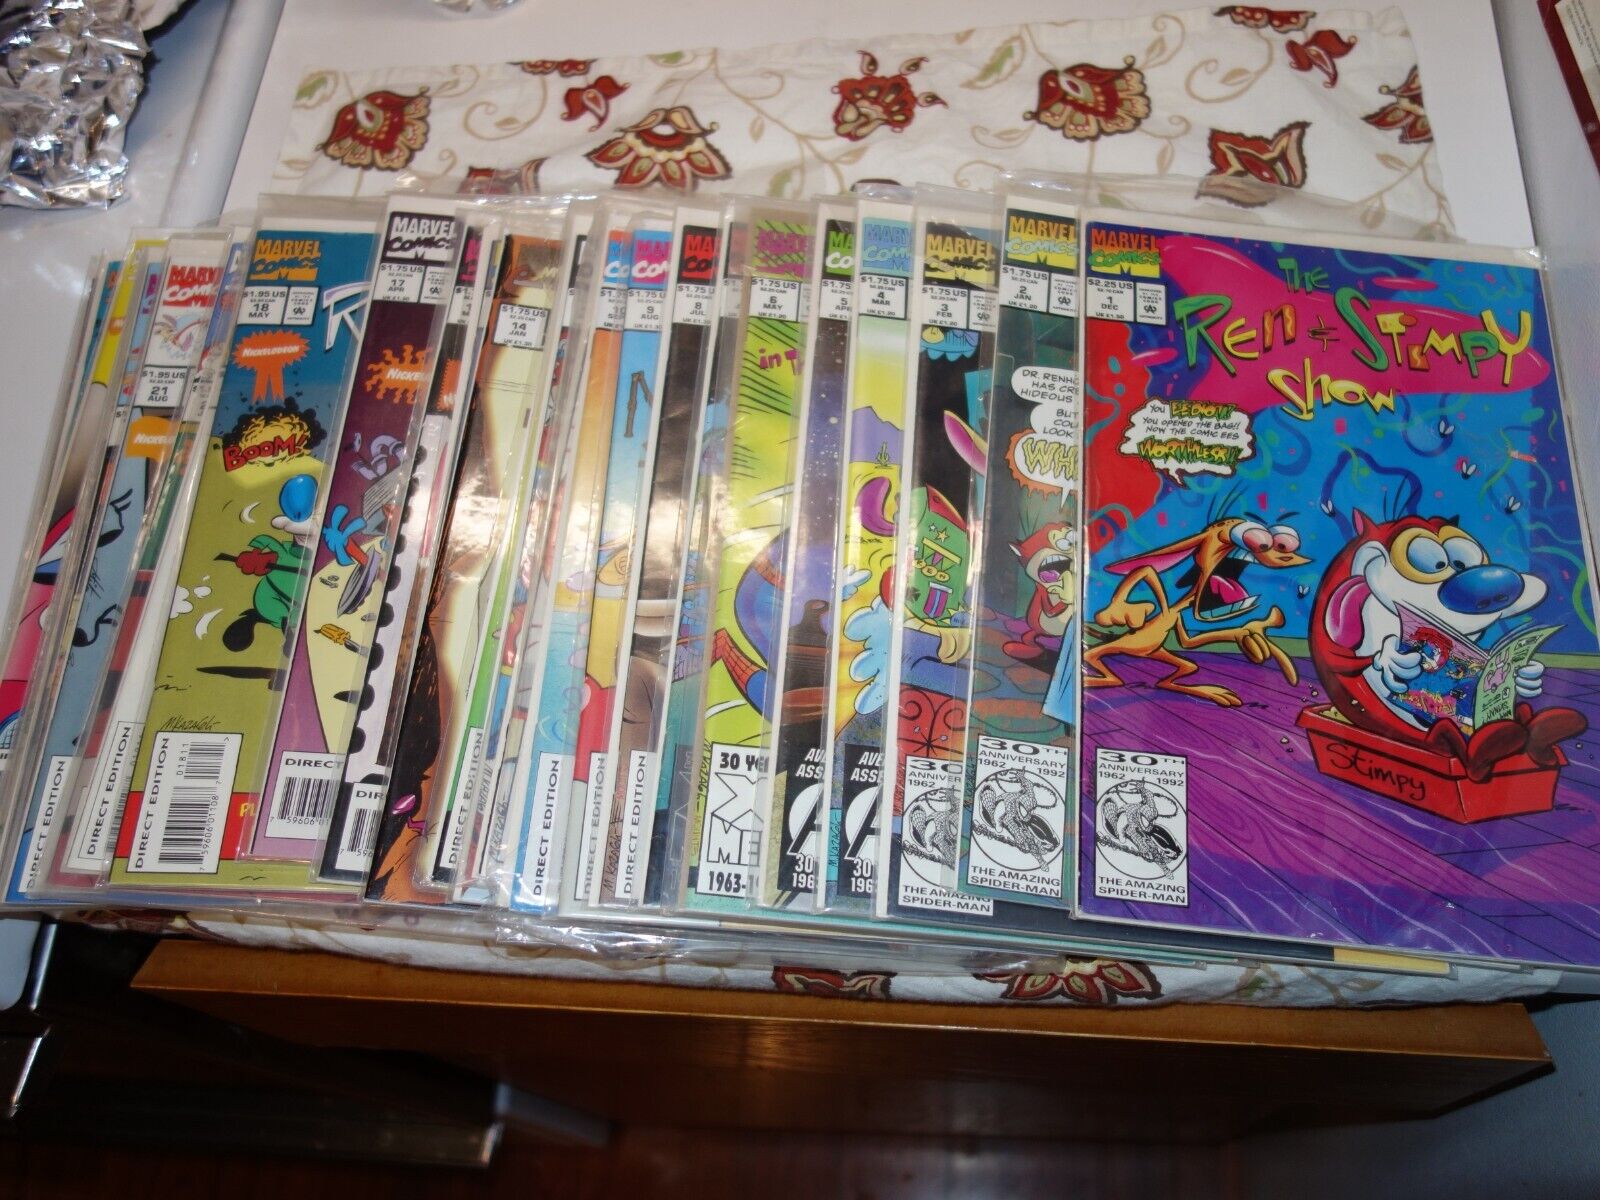 NICE Big Lot of Ren And Stimpy Show Comics - #1 - 32 Bagged & Boarded 